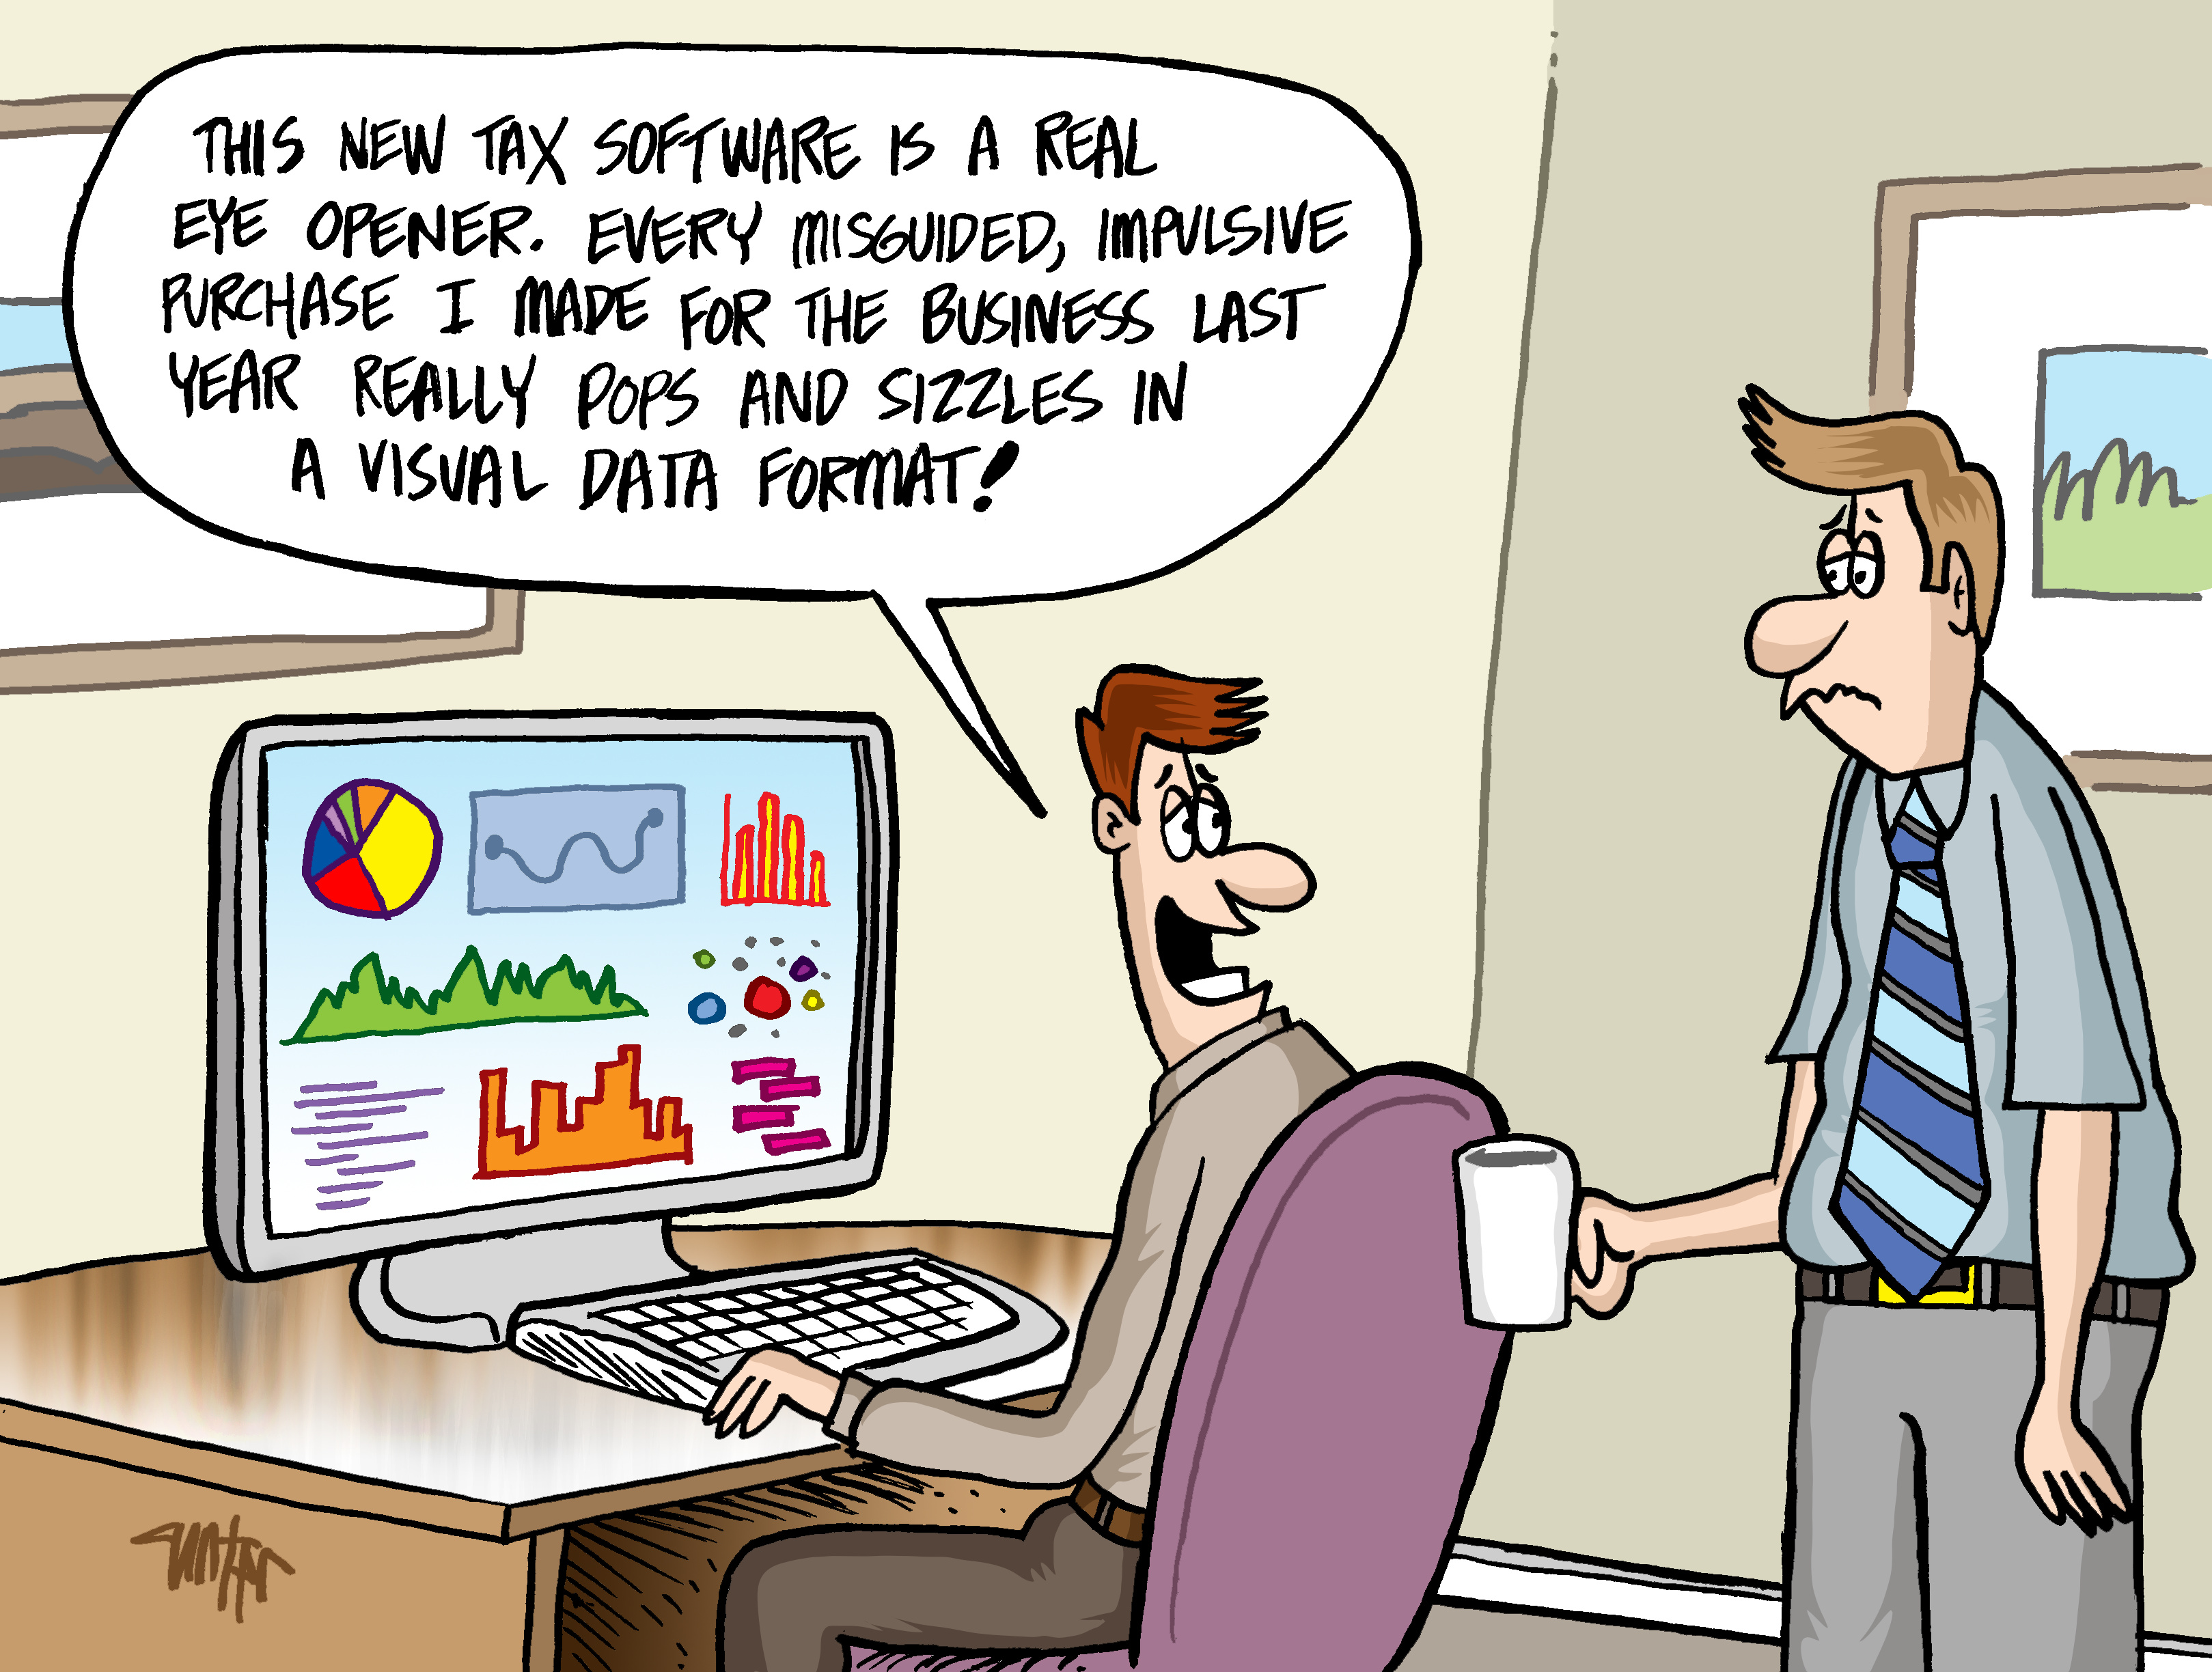 cartoon with computer screen showing lots of graphical displays and man says:  This new tax software is a real eye opener. Every misguided, impulsive purchase I made for the business last year really pops and sizzles in a visual data format!